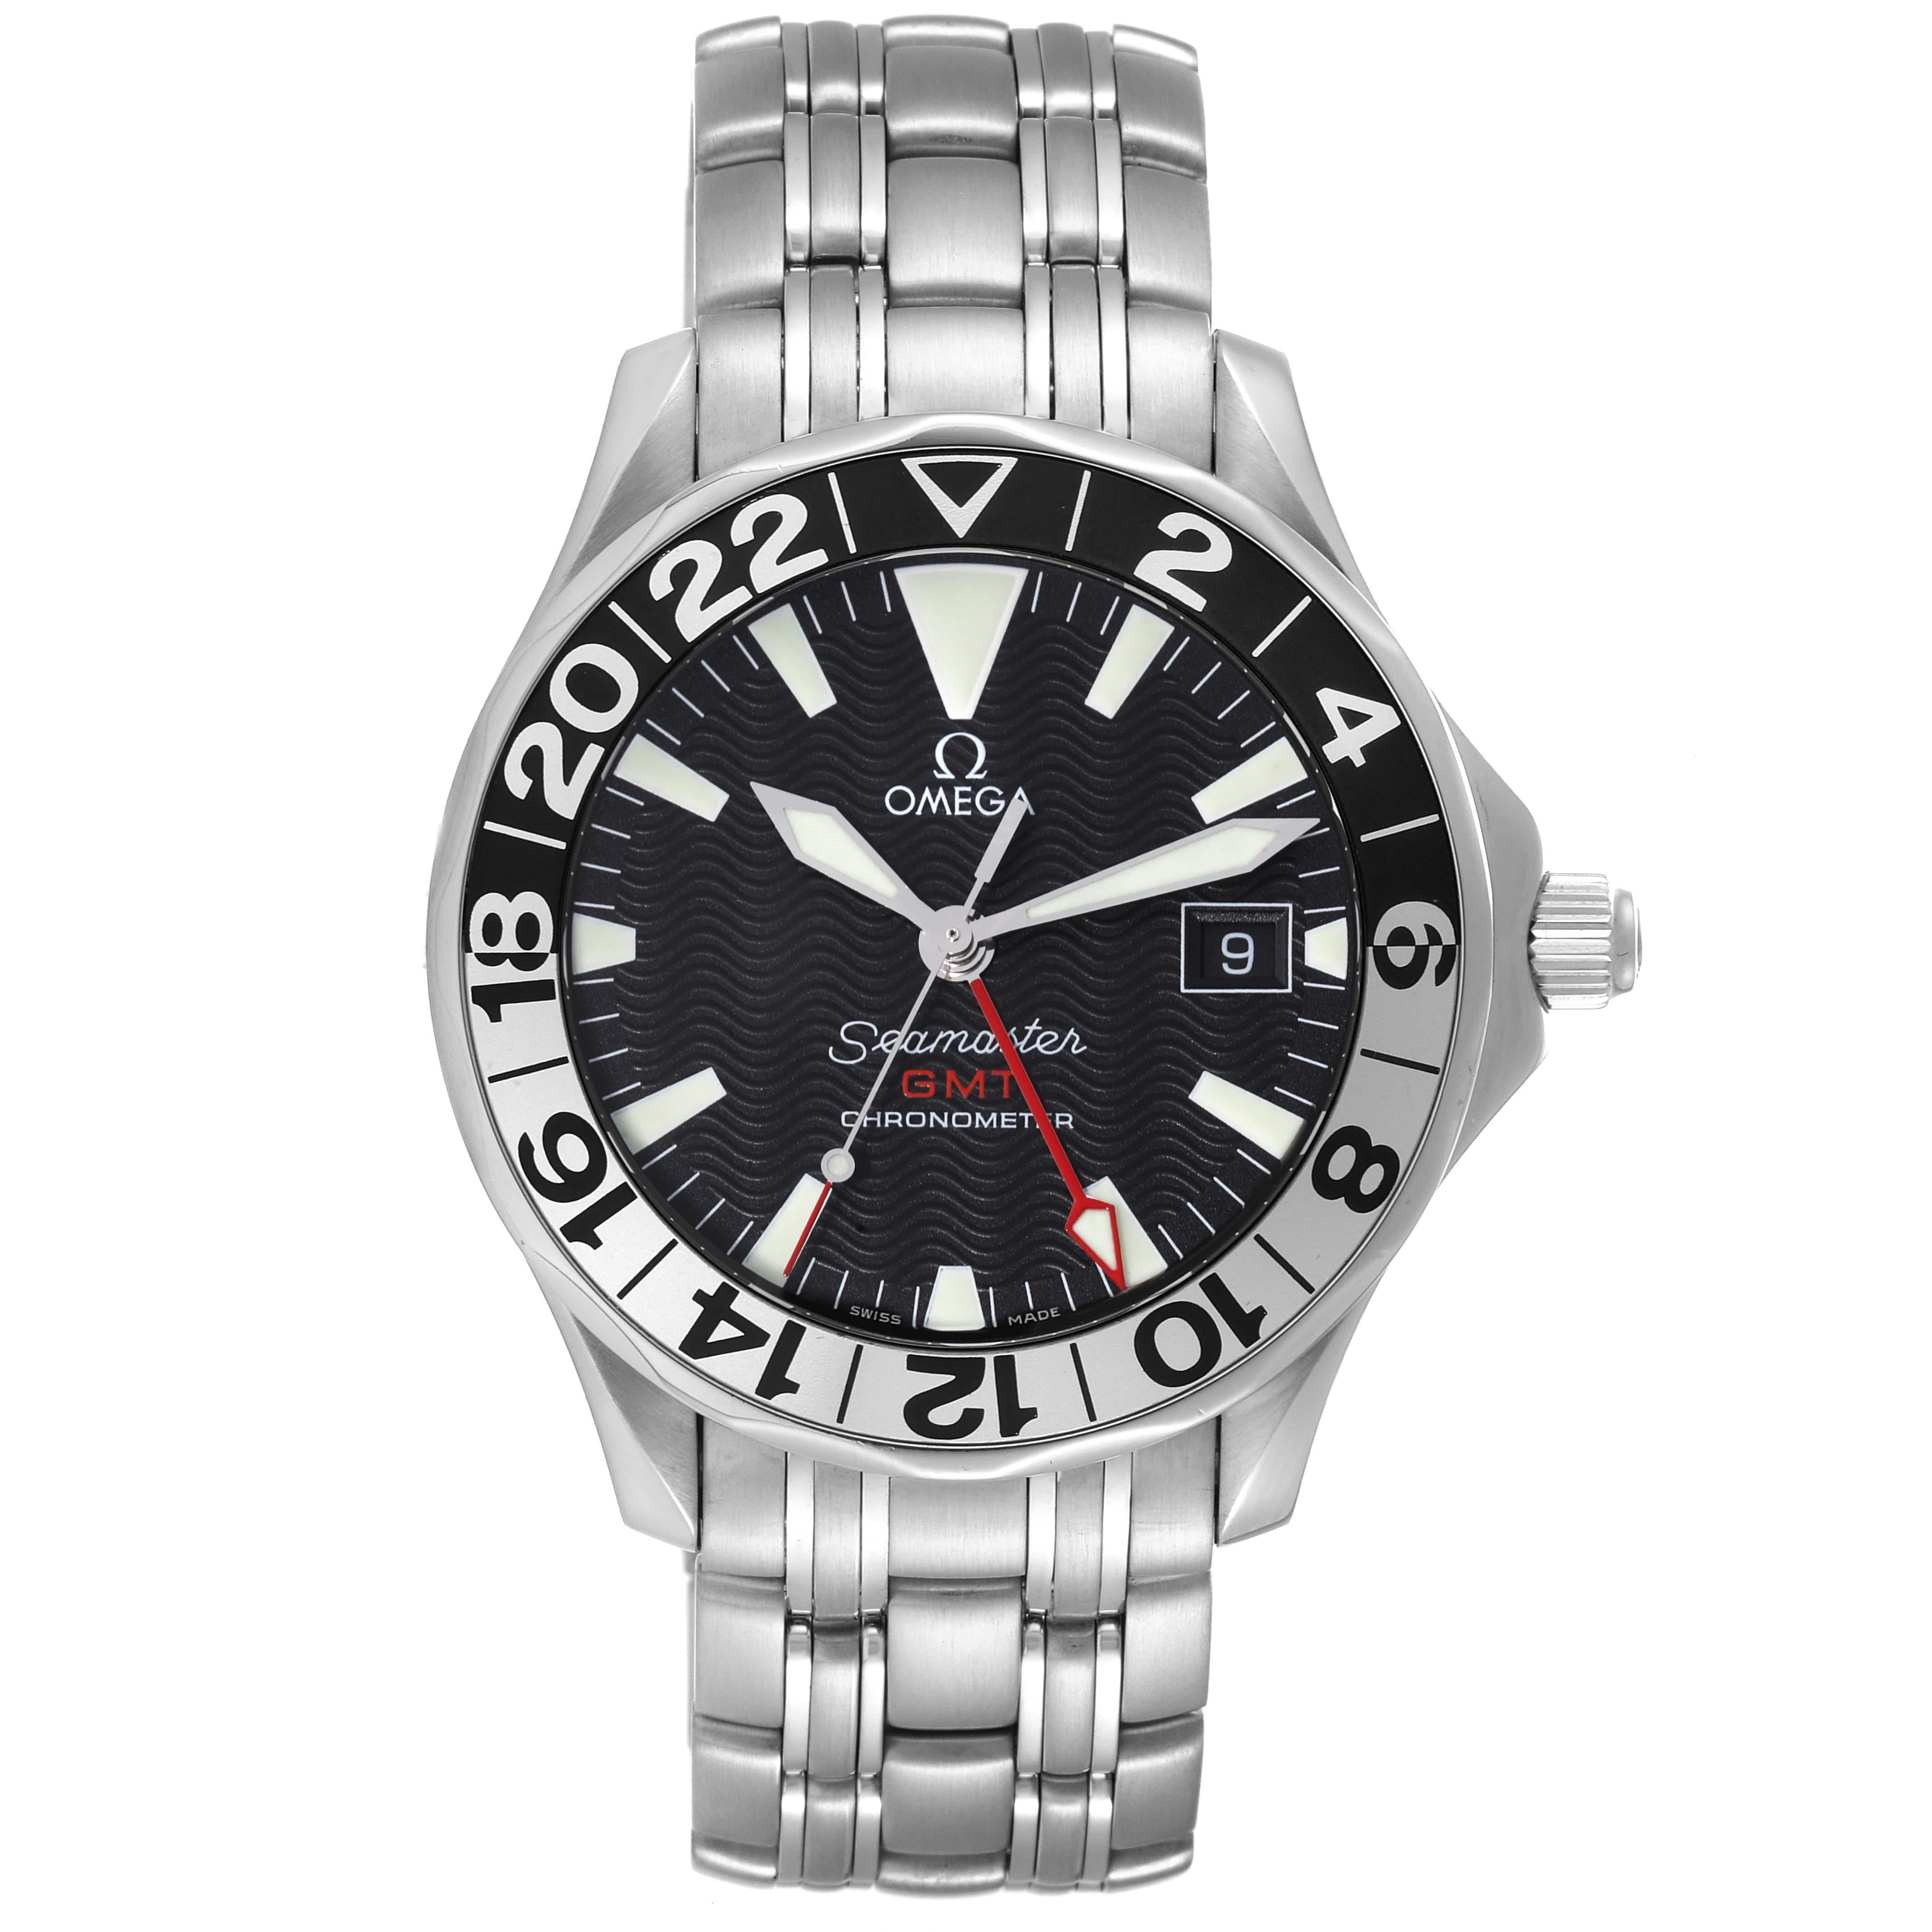 Omega Seamaster GMT 50th Anniversary Steel Mens Watch 2534.50.00 Box Card. Officially certified chronometer automatic self-winding movement. Brushed and polished stainless steel case 41 mm in diameter. Omega logo on the crown. Black and silver 24